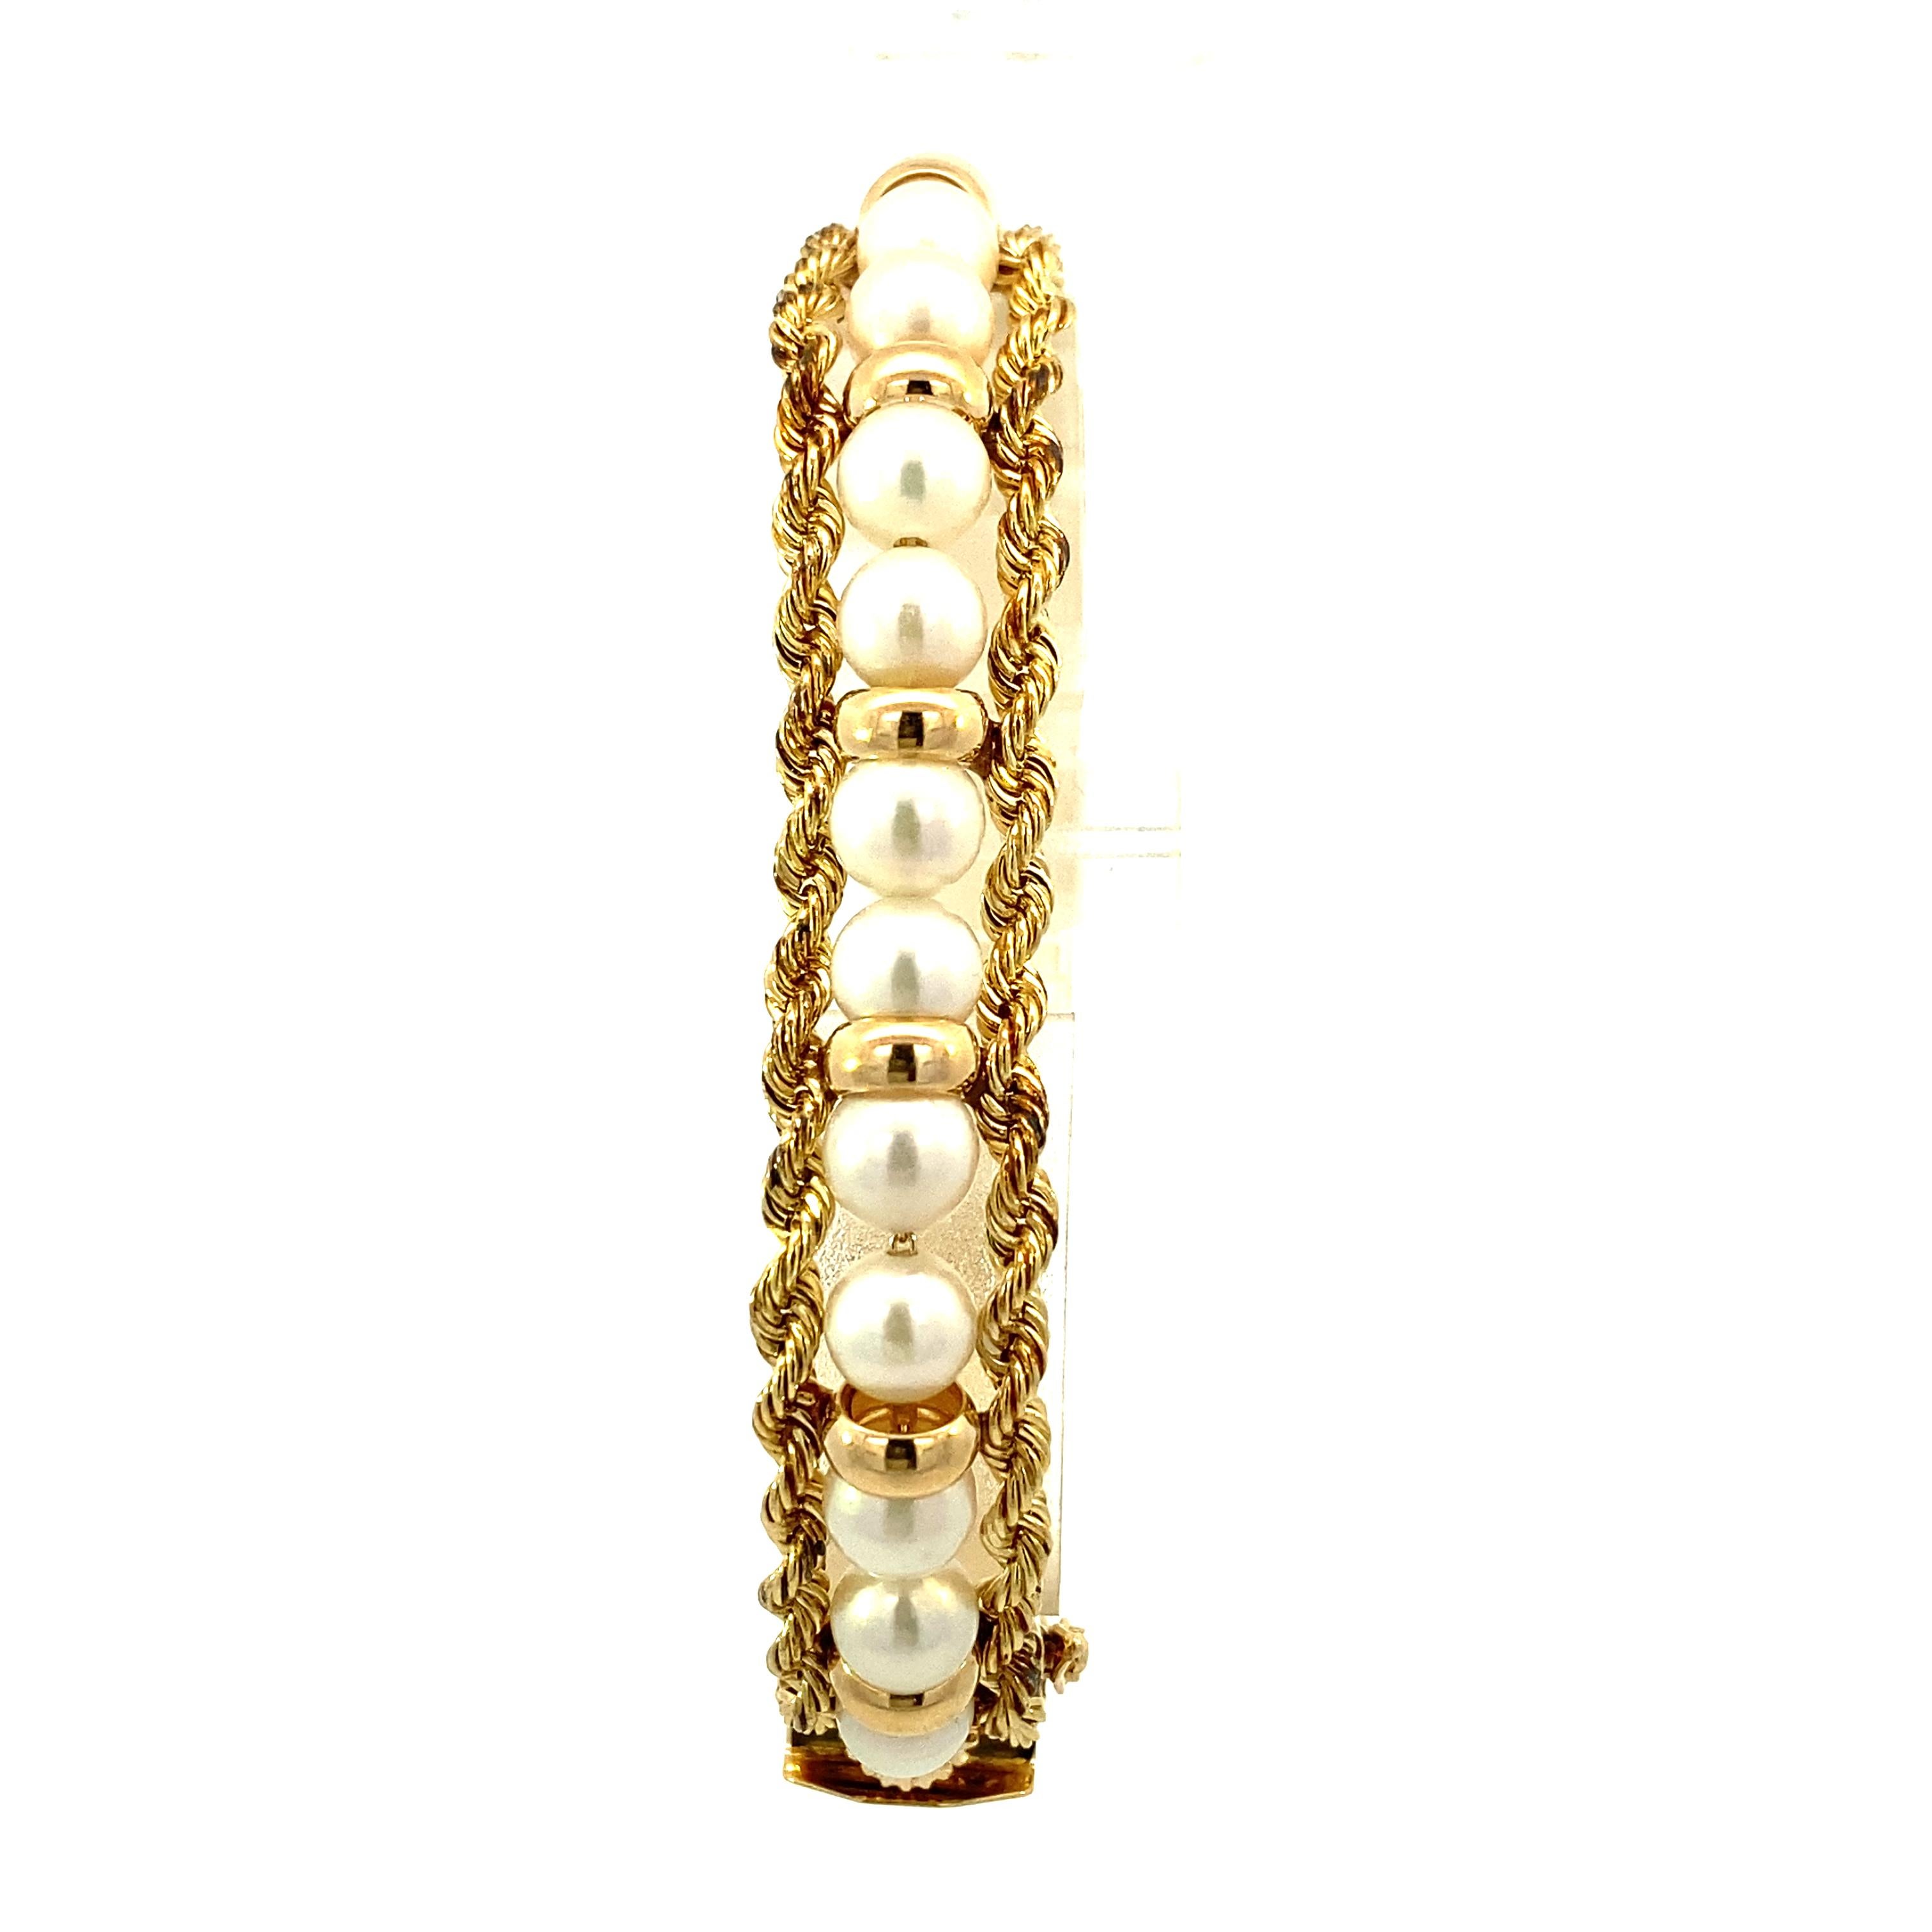 Vintage Yellow Gold Pearl Bracelet. Beautiful and classic 14k yellow gold vintage bracelet with 24 - 6.0-6.5 mm pearls alternating with gold beads and two parallel gold rope strands. Secure box clasp with single safety-8 included. Flexible design